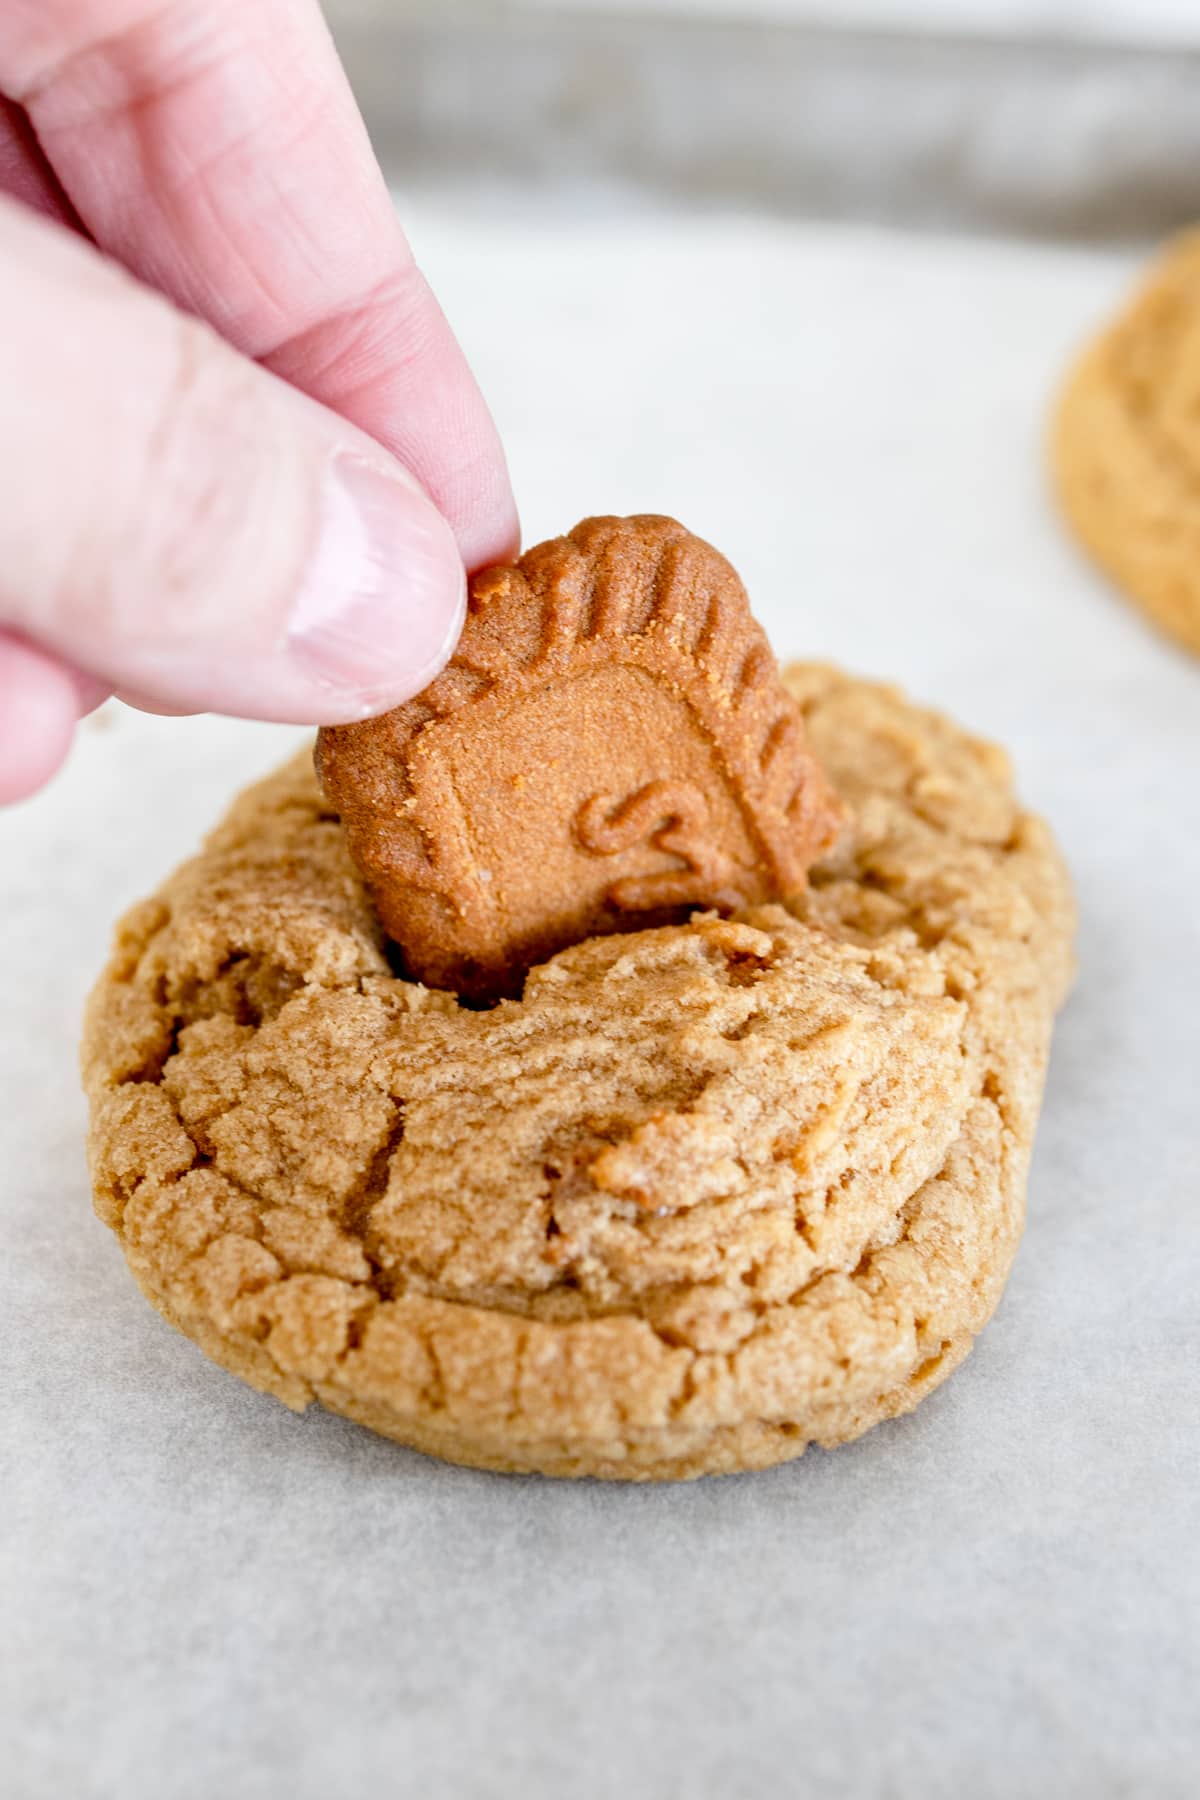 Close up of a freshly baked Biscoff cookie with a broken official Biscoff cookie being added to the center of the cookie.